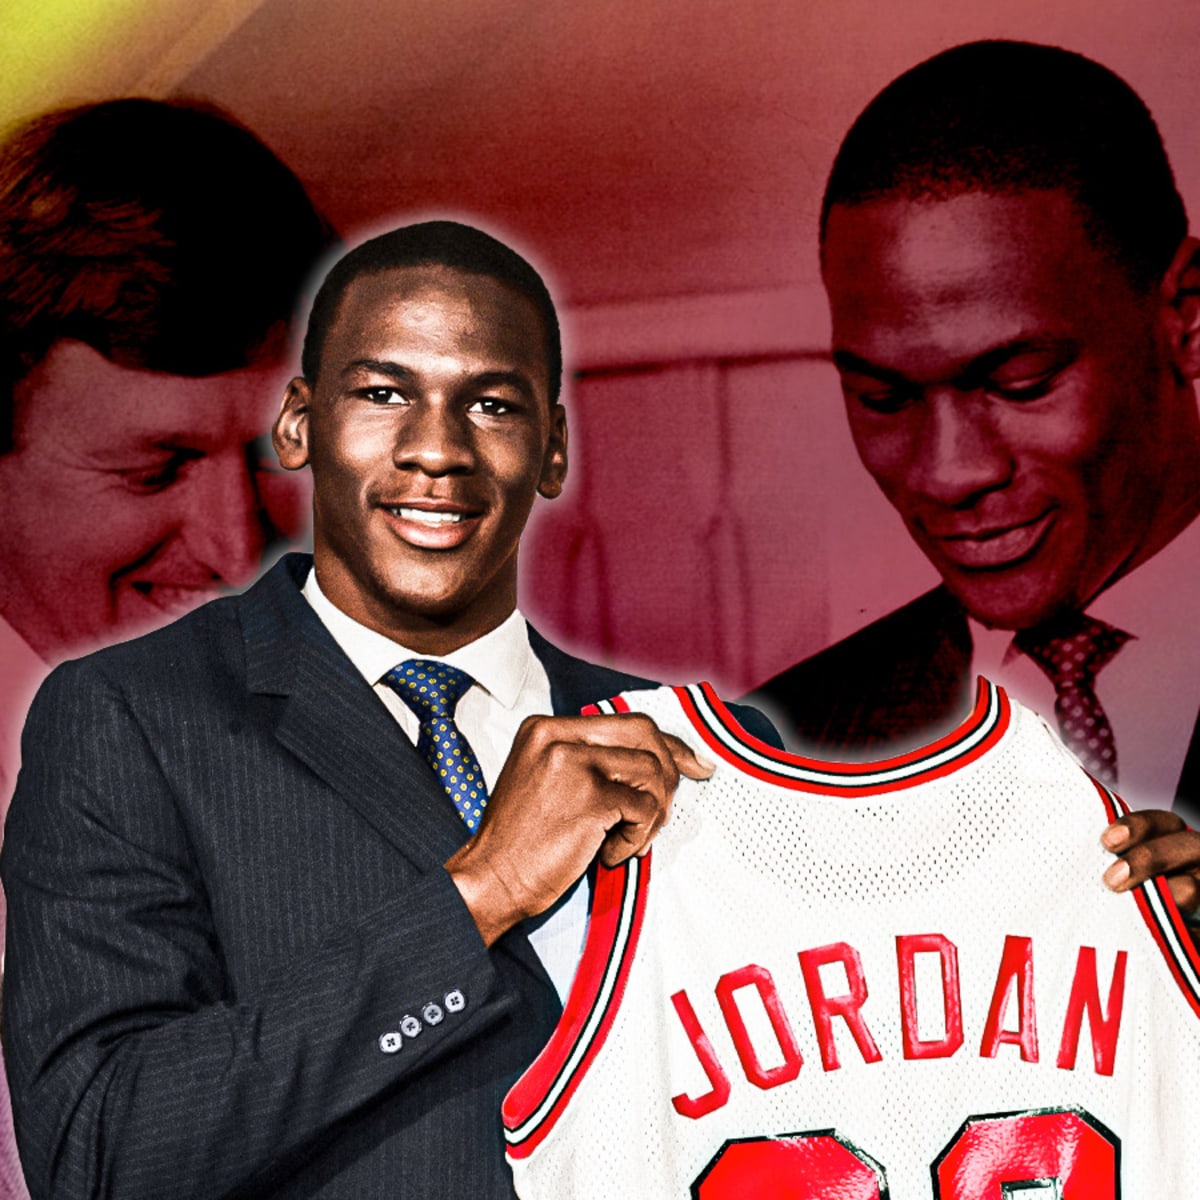 Michael Jordan Made a “Nervous” Confession in 2014 on Second